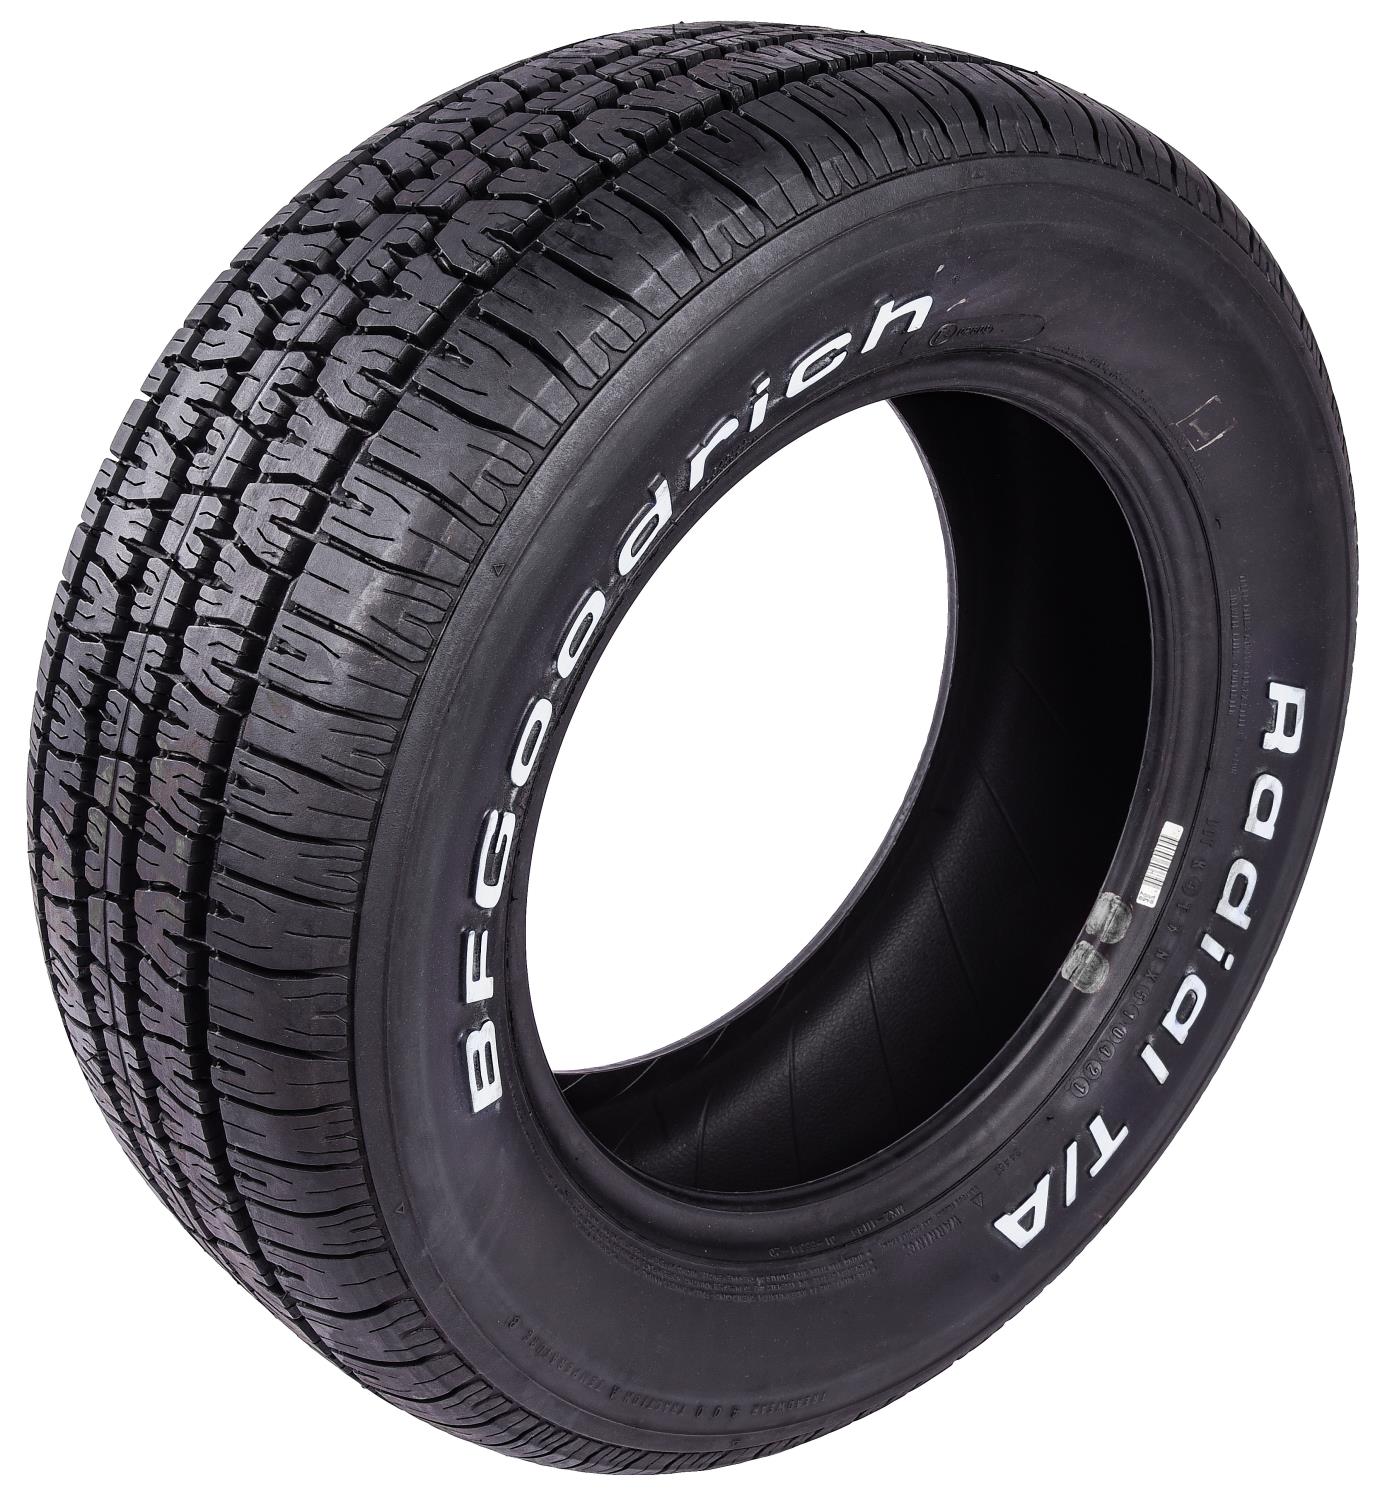 RADIAL T/A P215/60R14